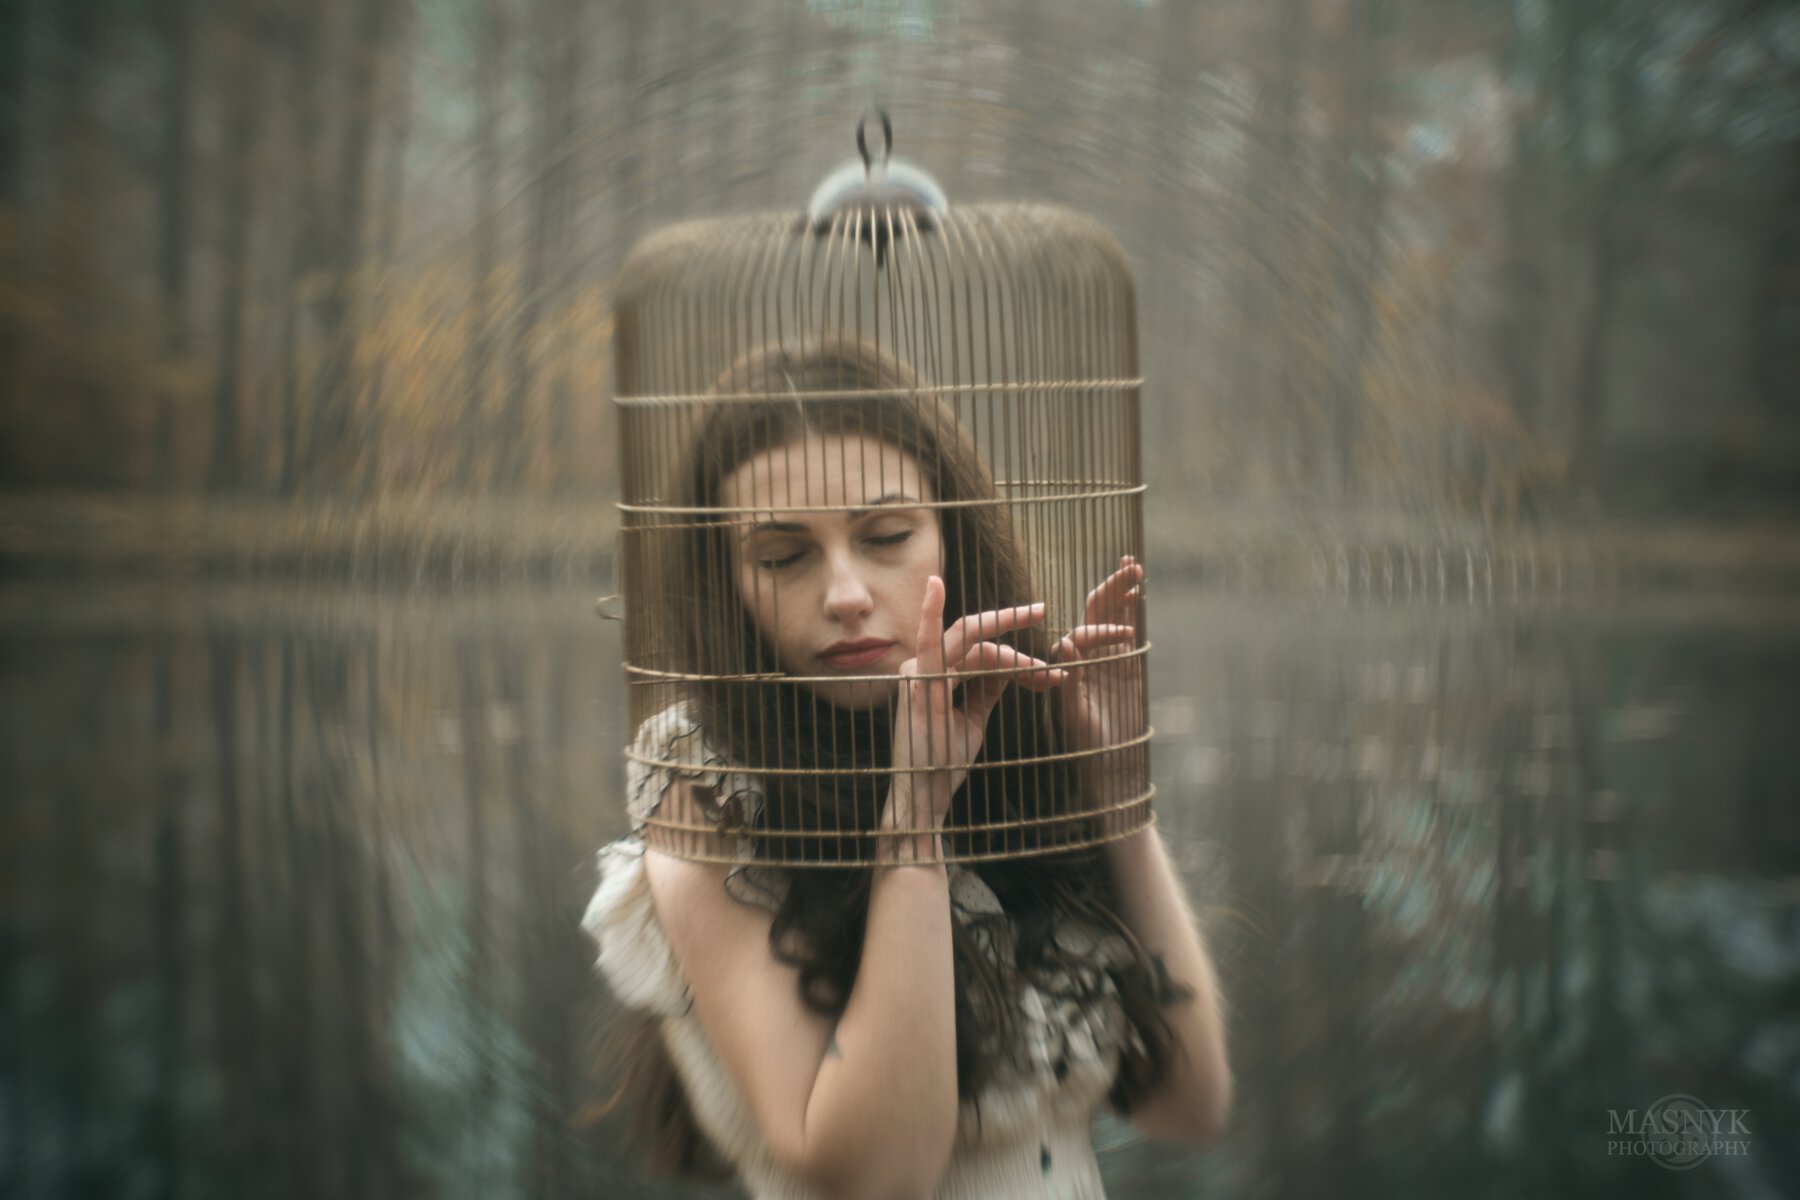 Dreamy woman with her head in a cage